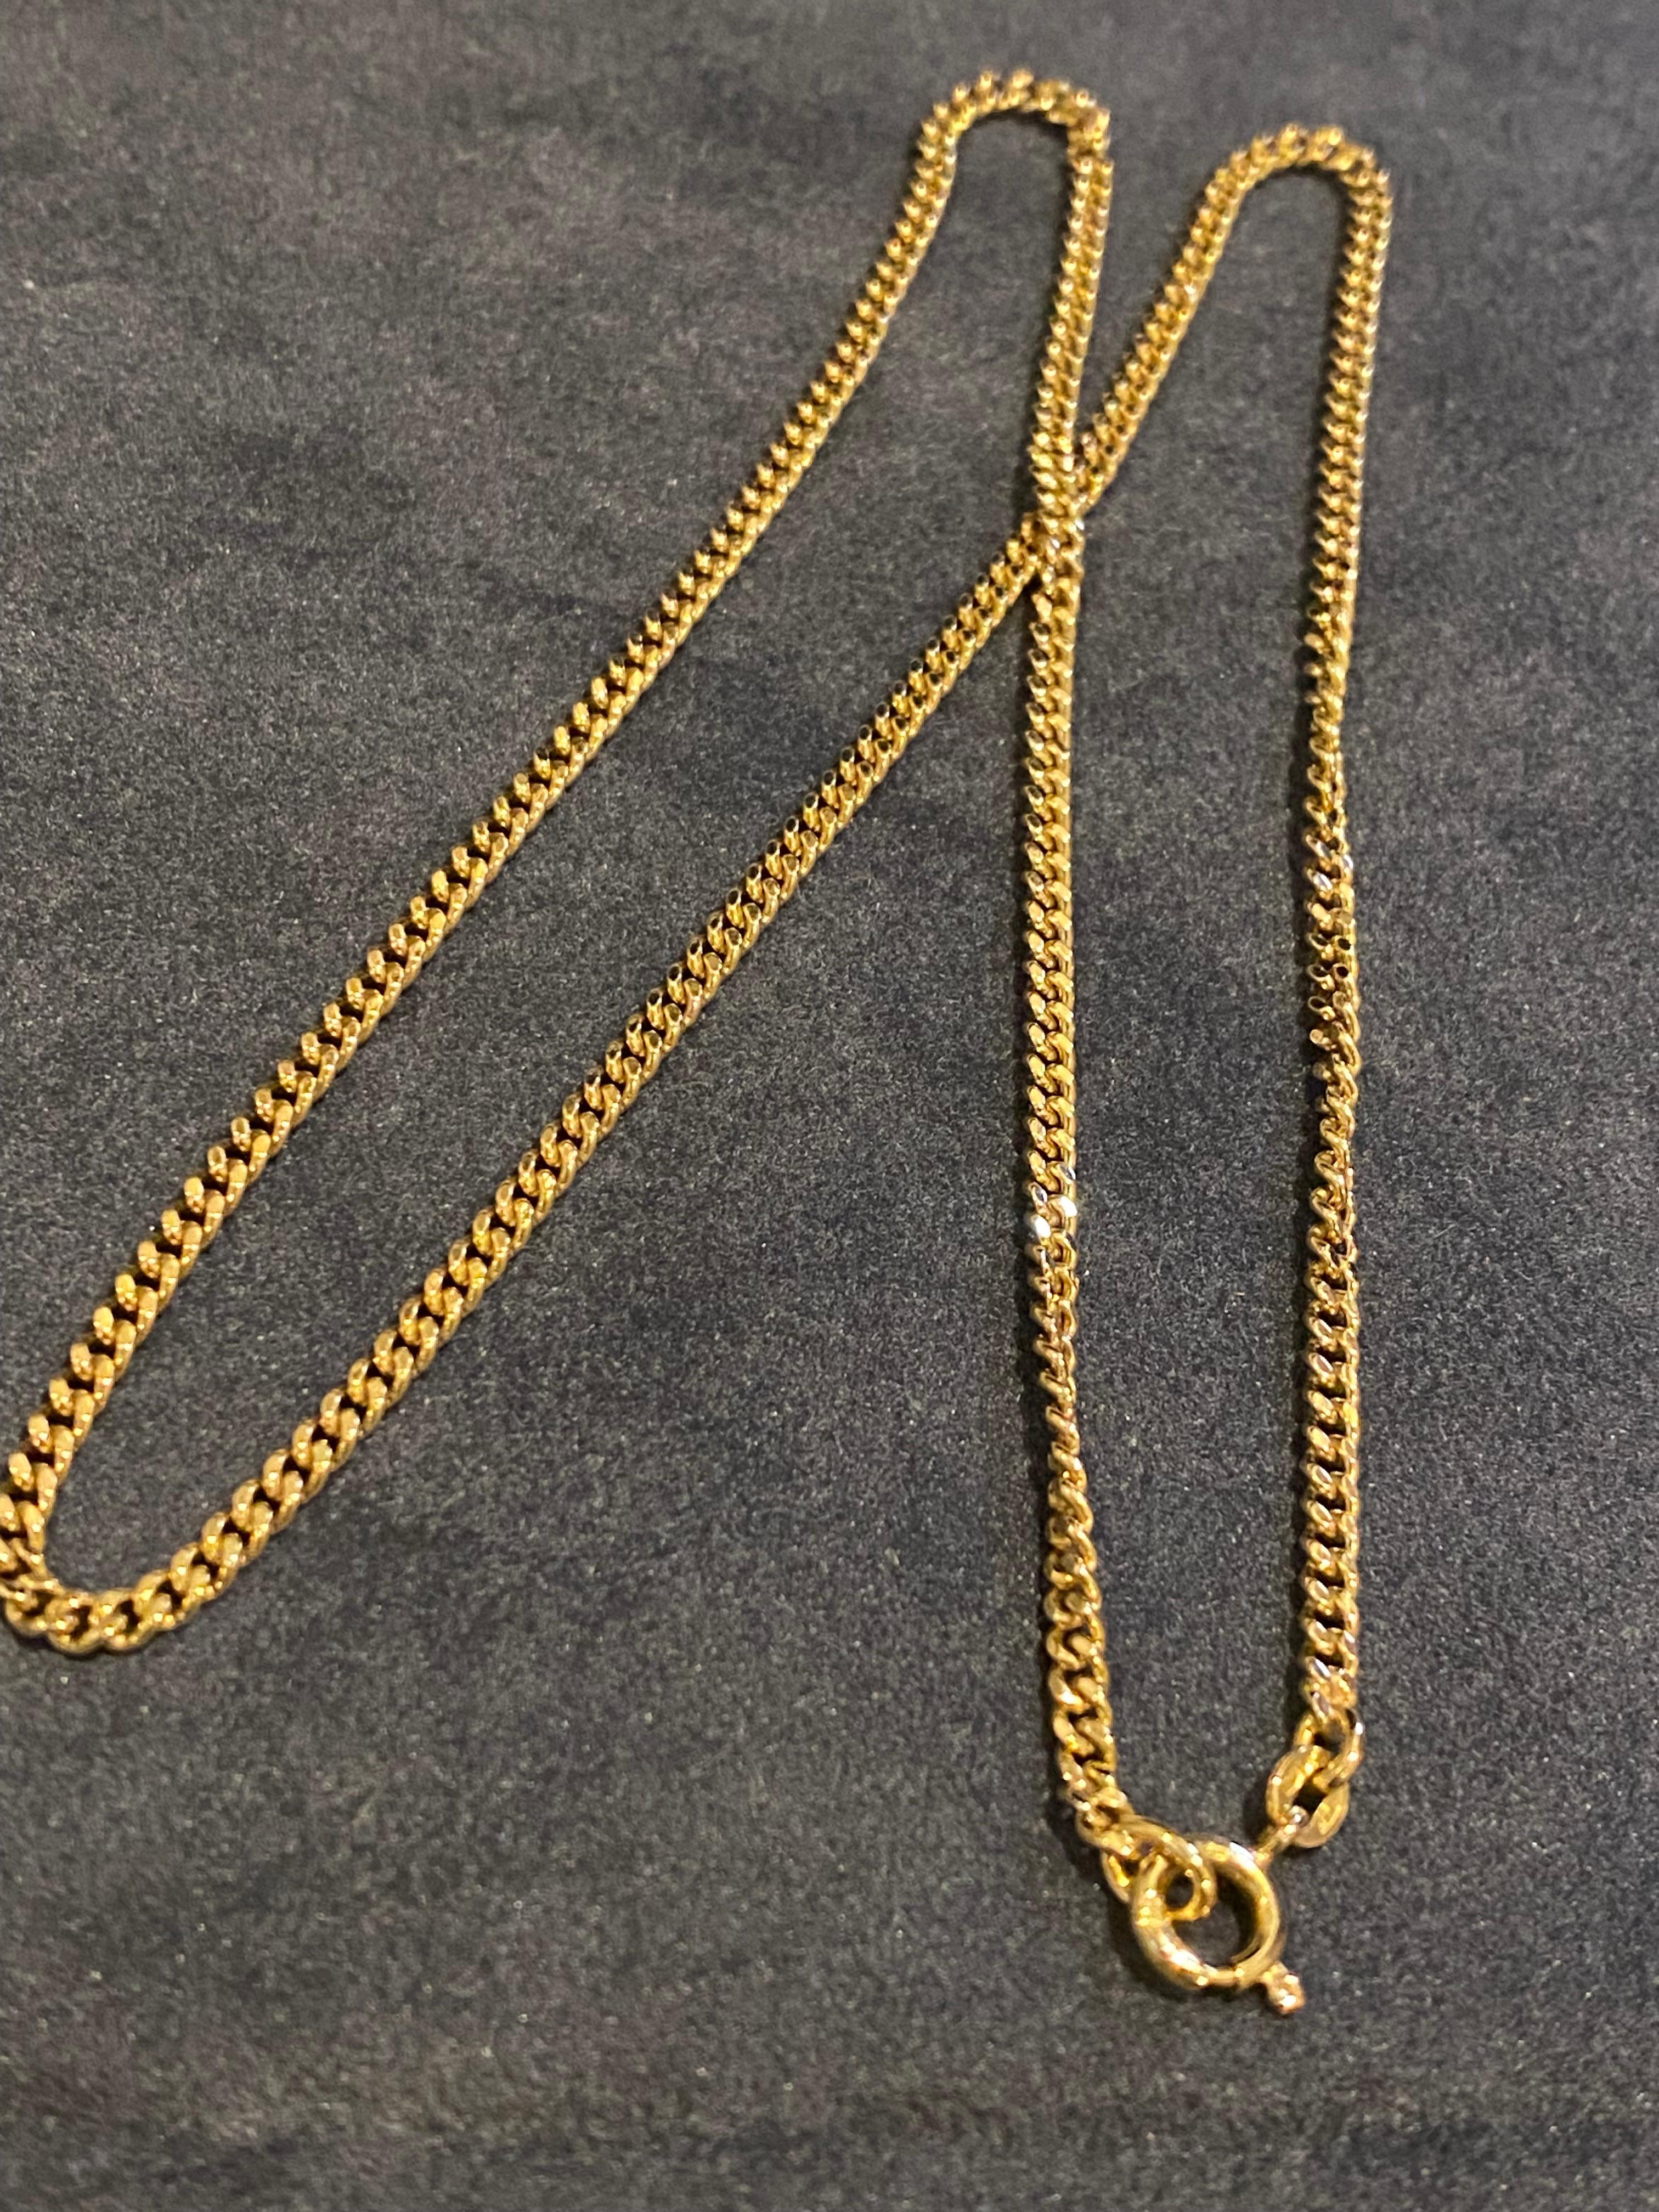 italy 750 gold necklace price